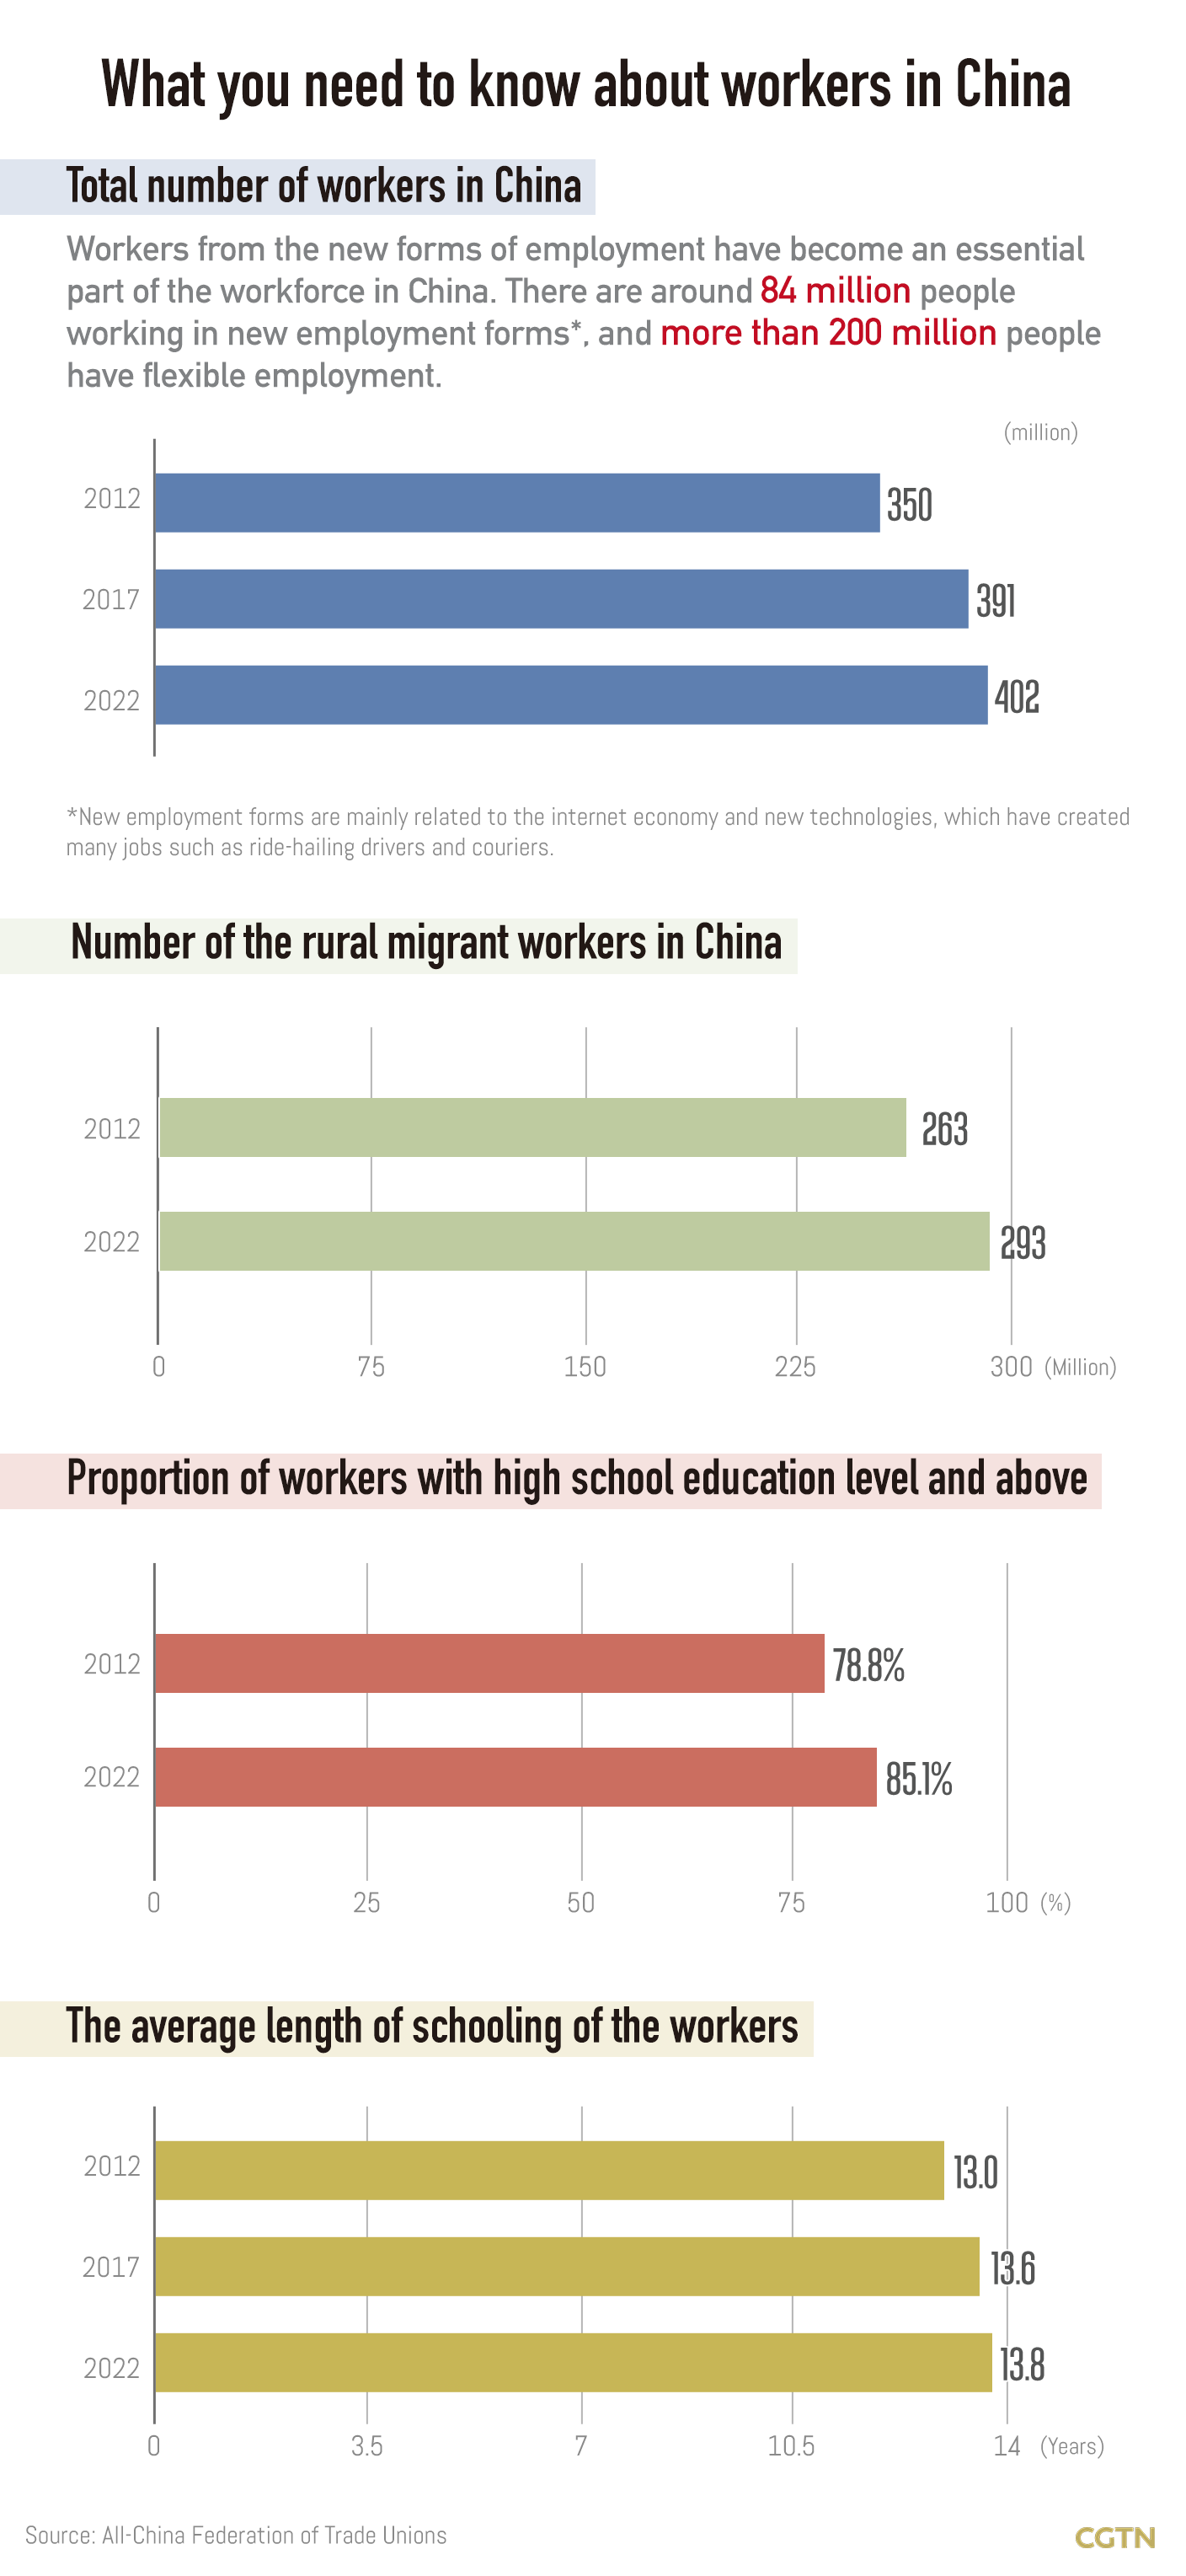 84 million workers in new job types in China drive focus on labor and social security